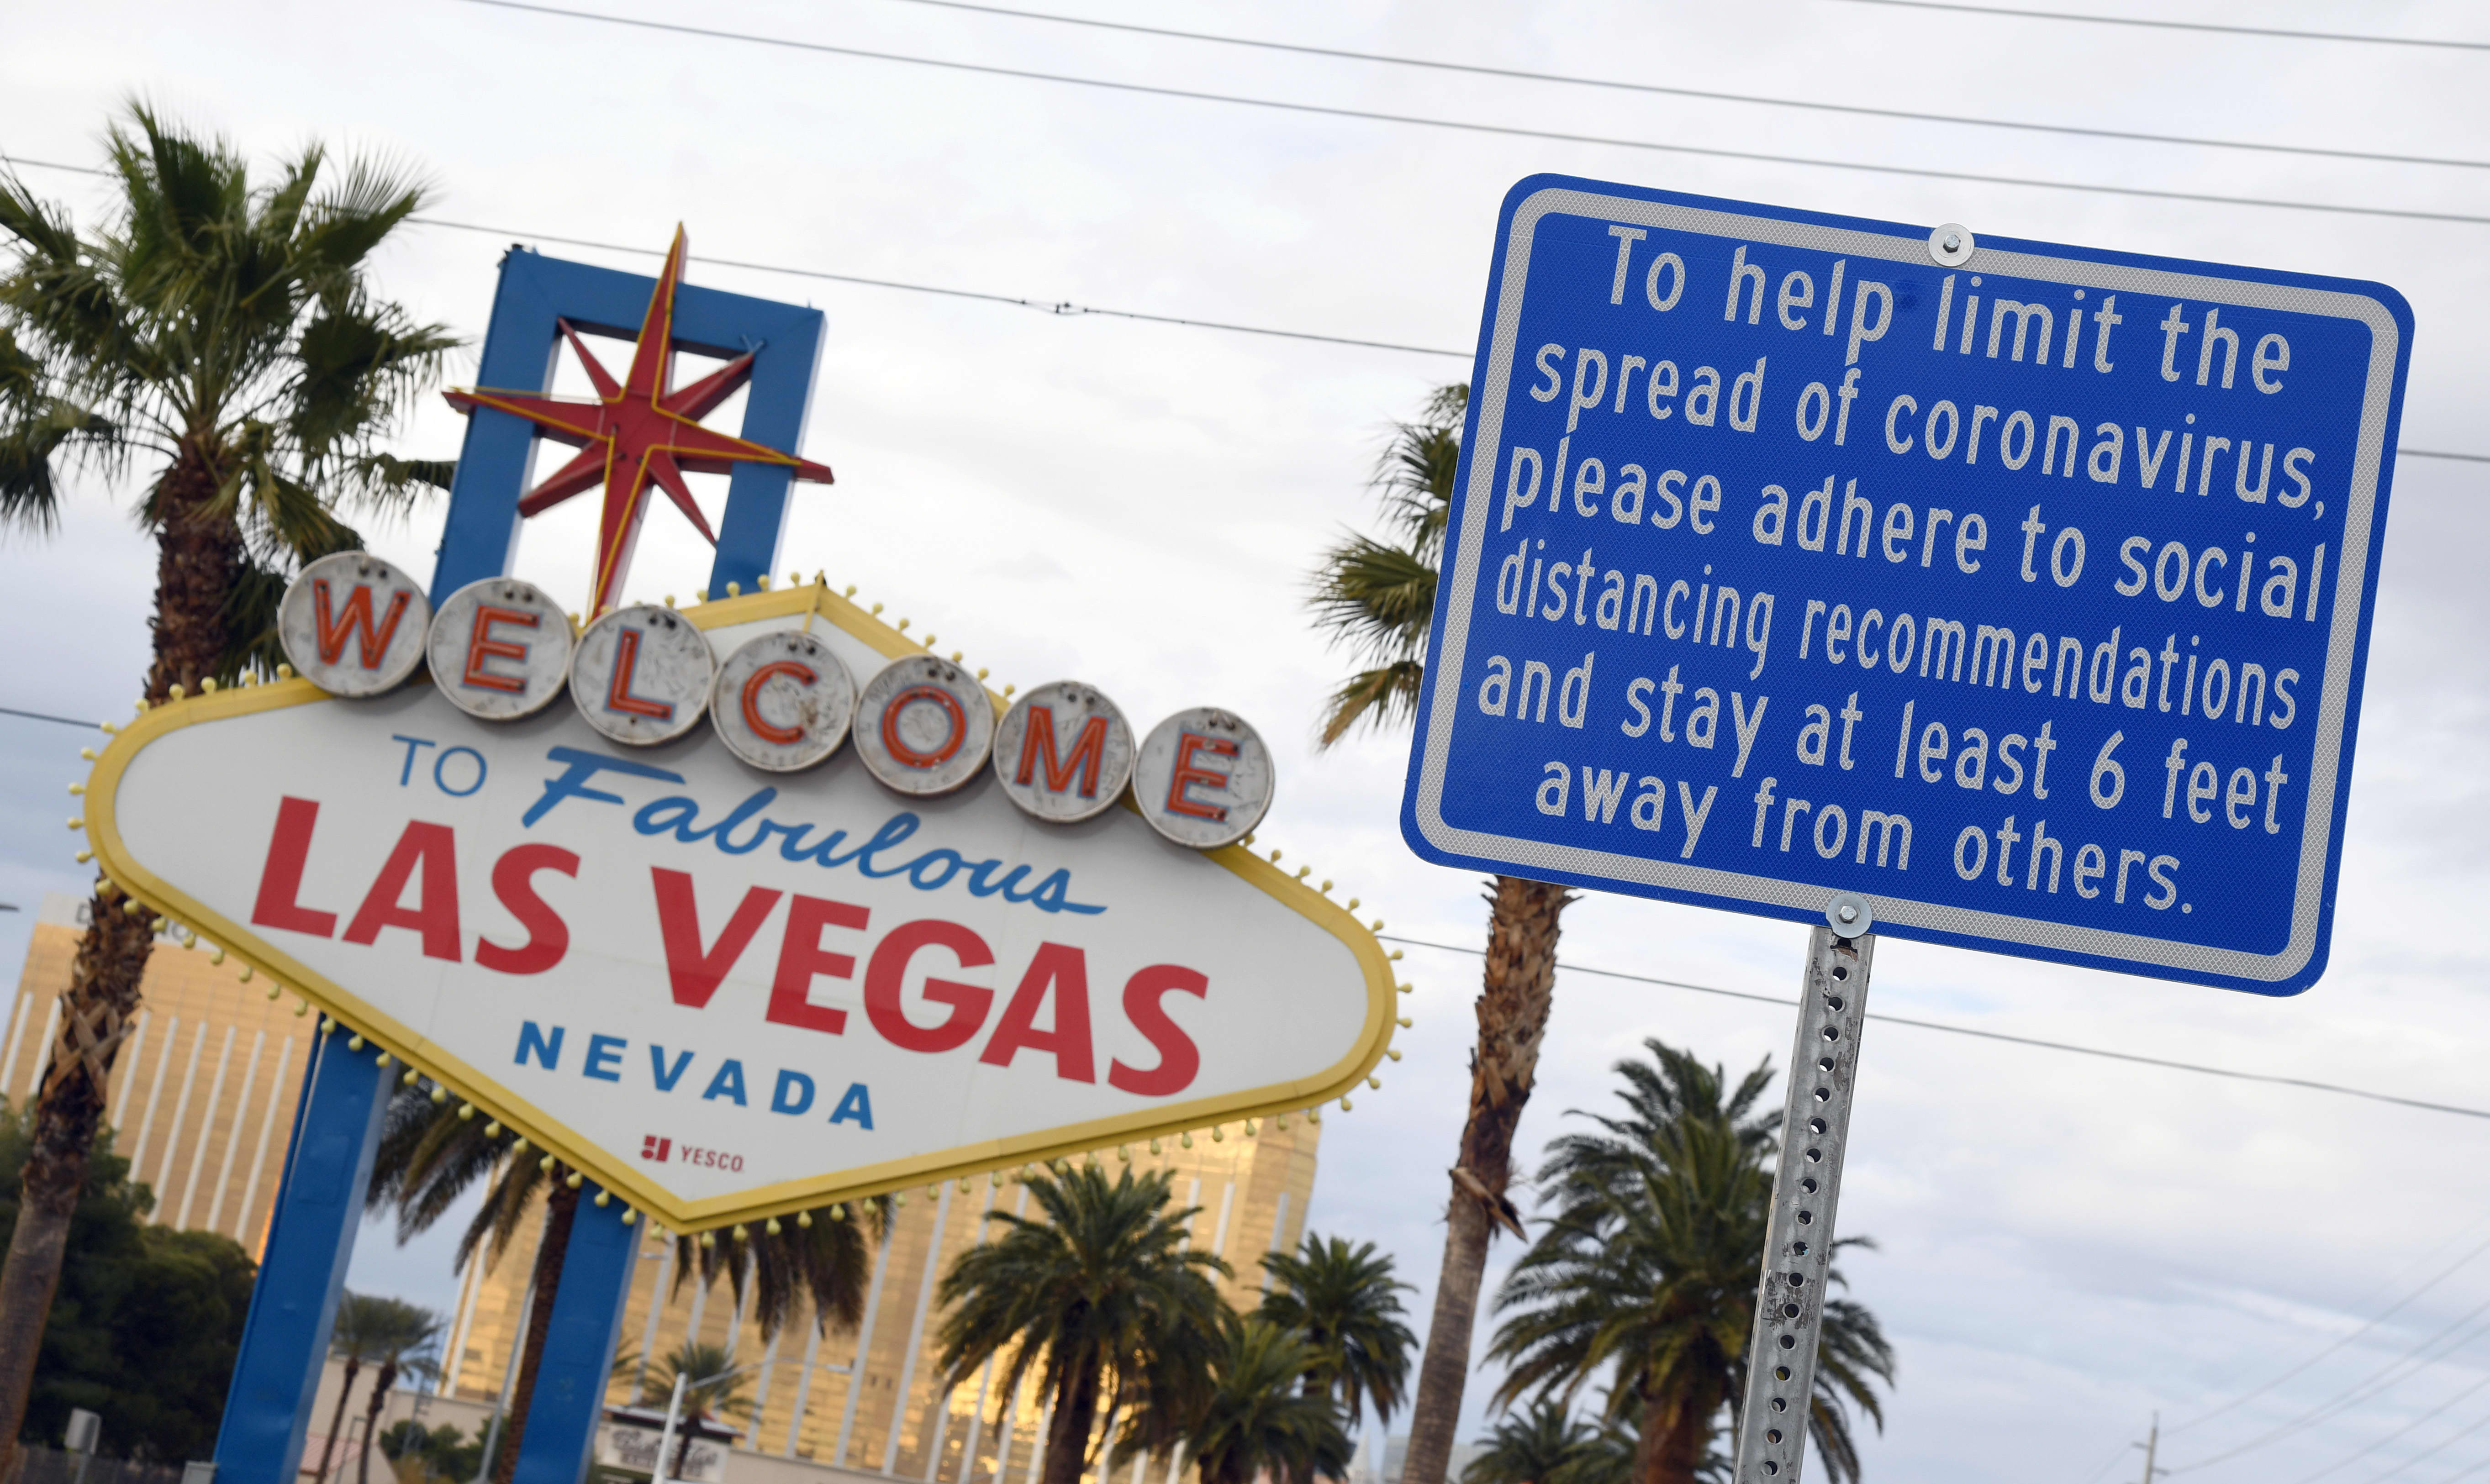 Las Vegas set to come out of Covid-19 better than ever